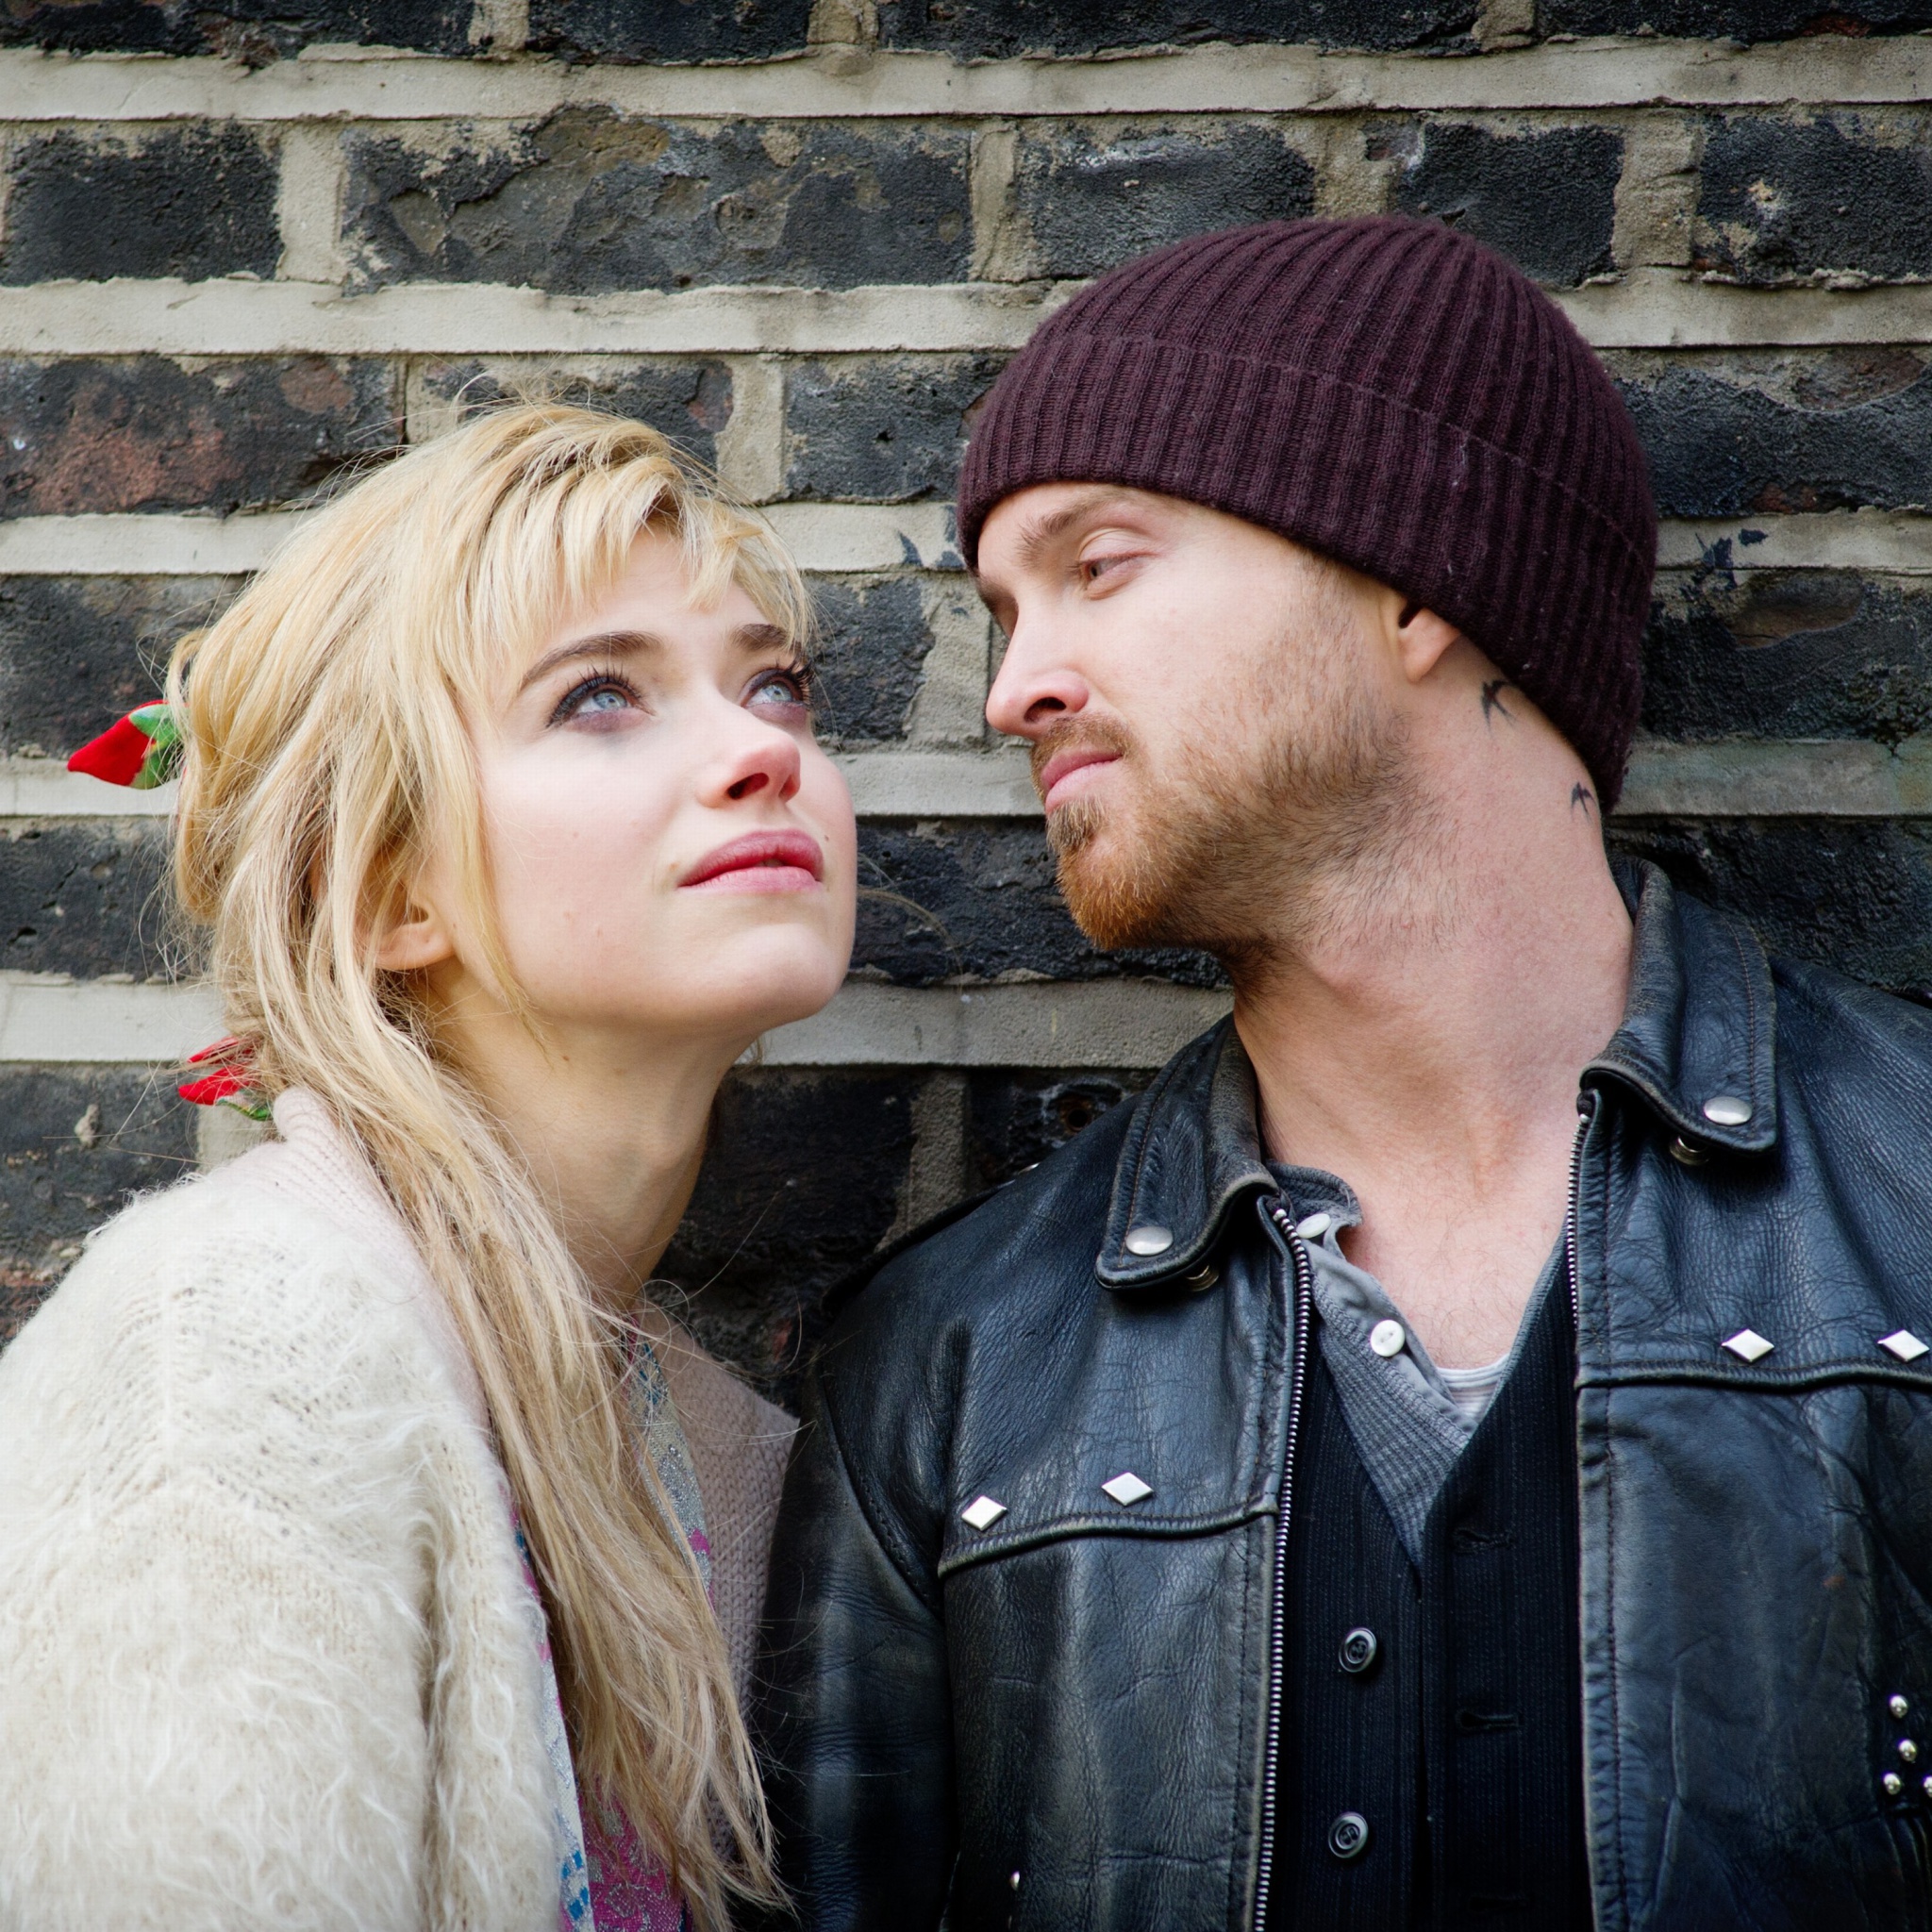 A Long Way Down with Aaron Paul and Imogen Poots wallpaper 2048x2048